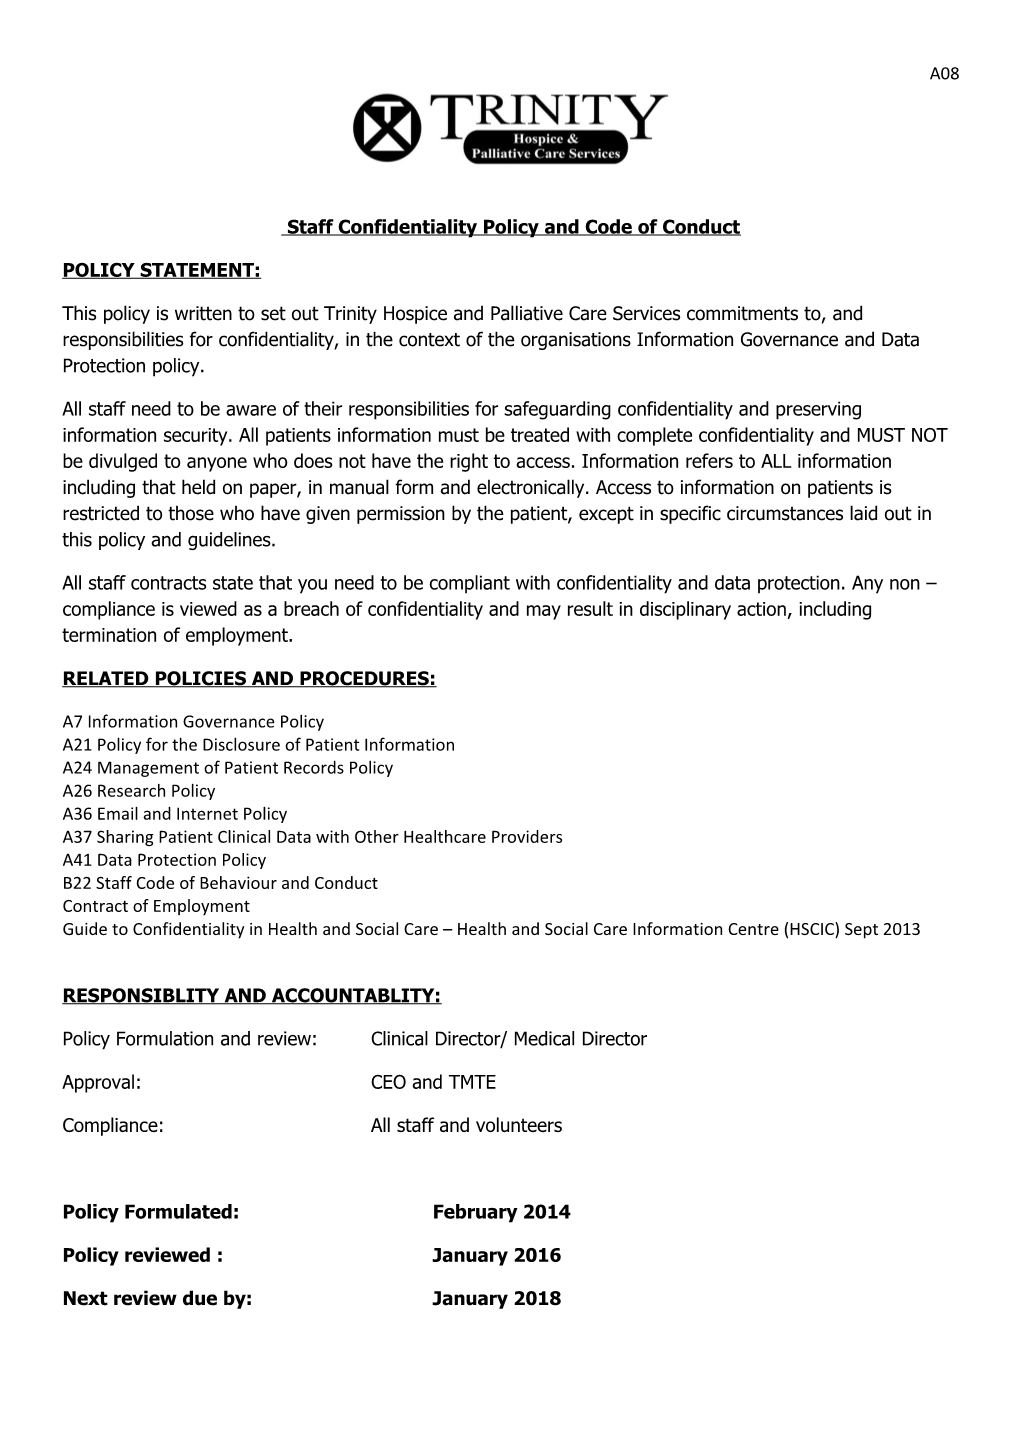 Staff Confidentiality Policy and Code of Conduct